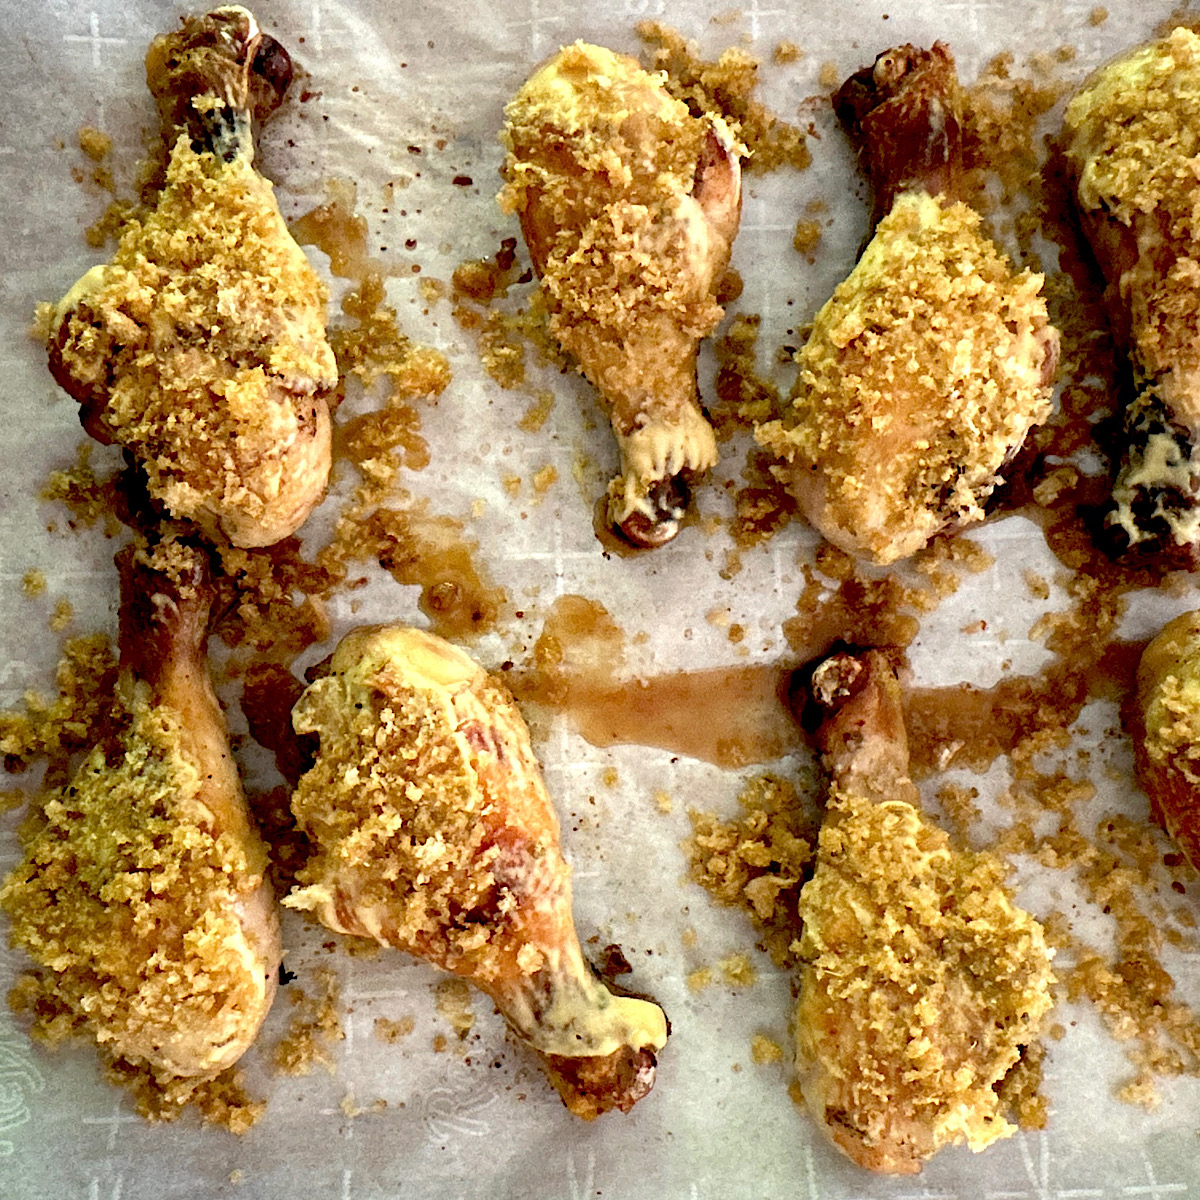 Chicken legs with mustard coating and low carb breading.